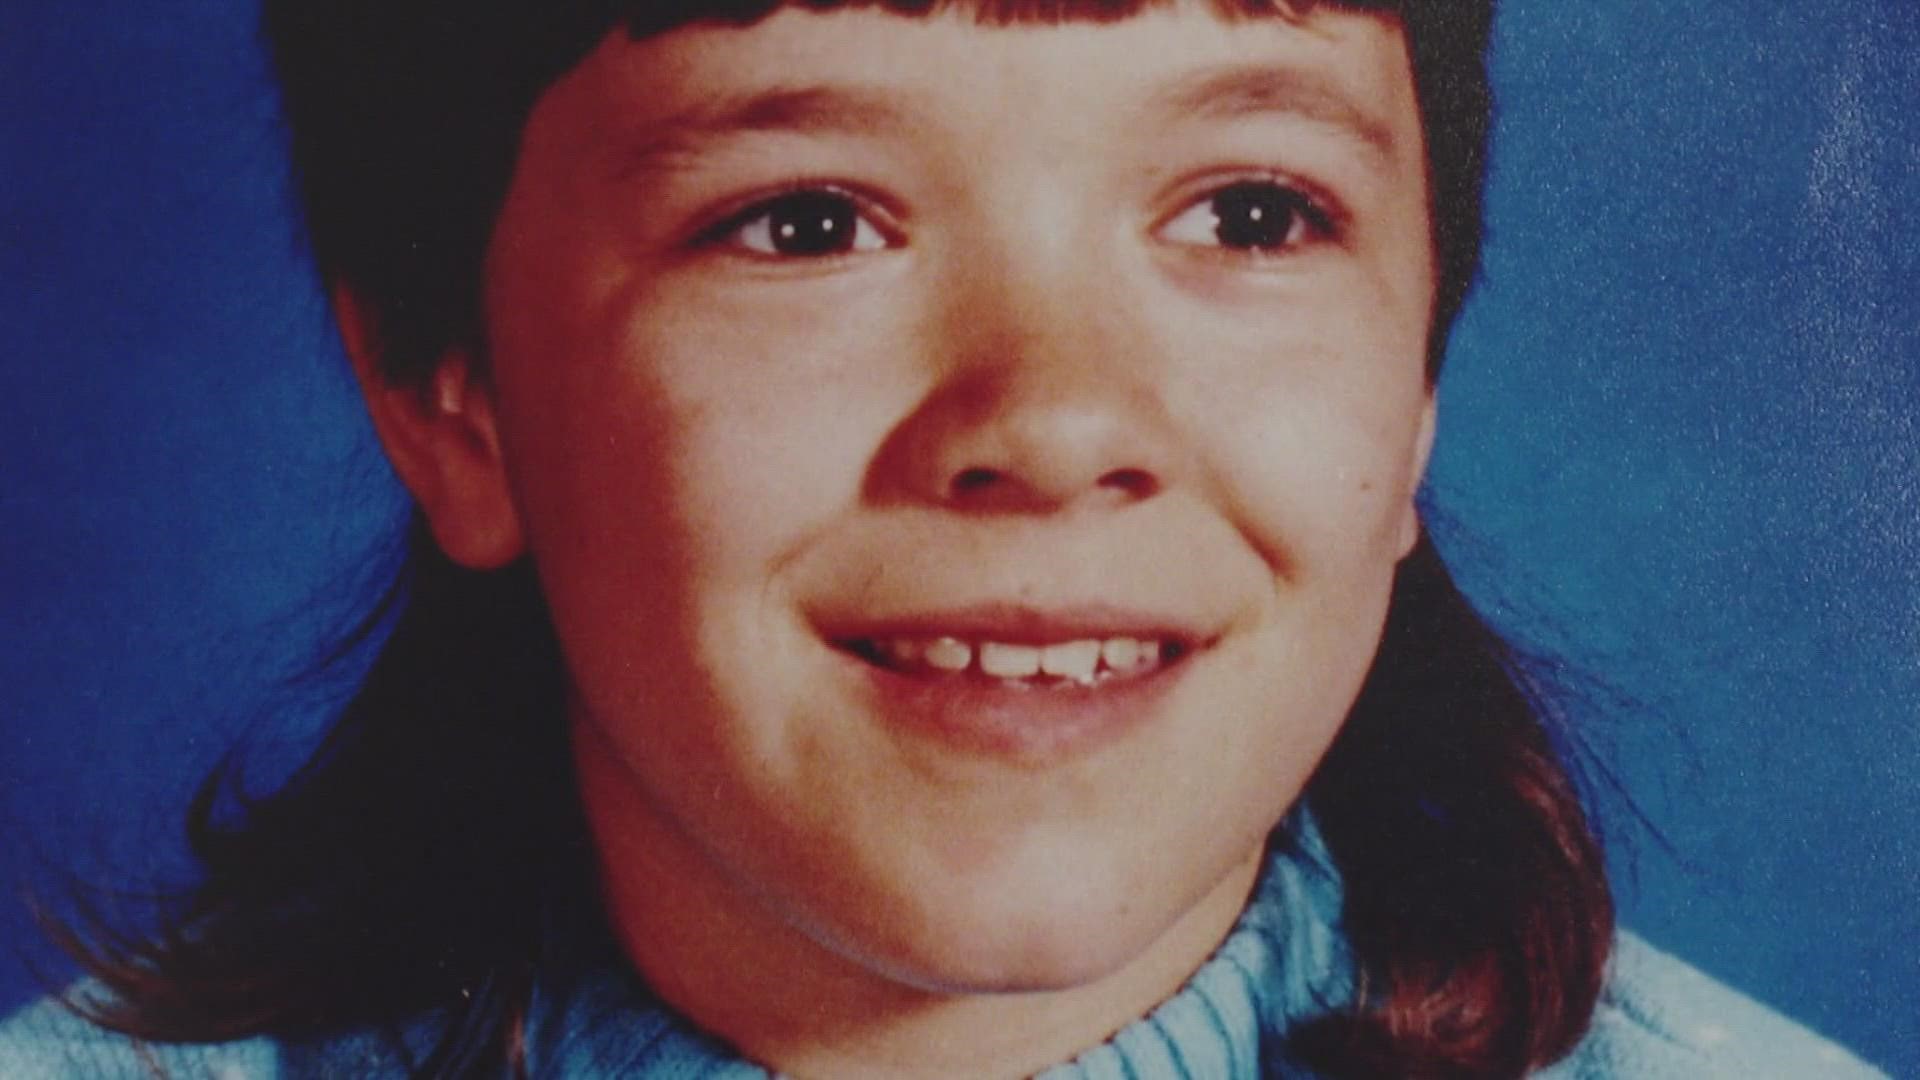 It’ll be 33 years this October since 10-year-old Sheila Renae Finch was found murdered in Speegleville Park near Lake Waco.